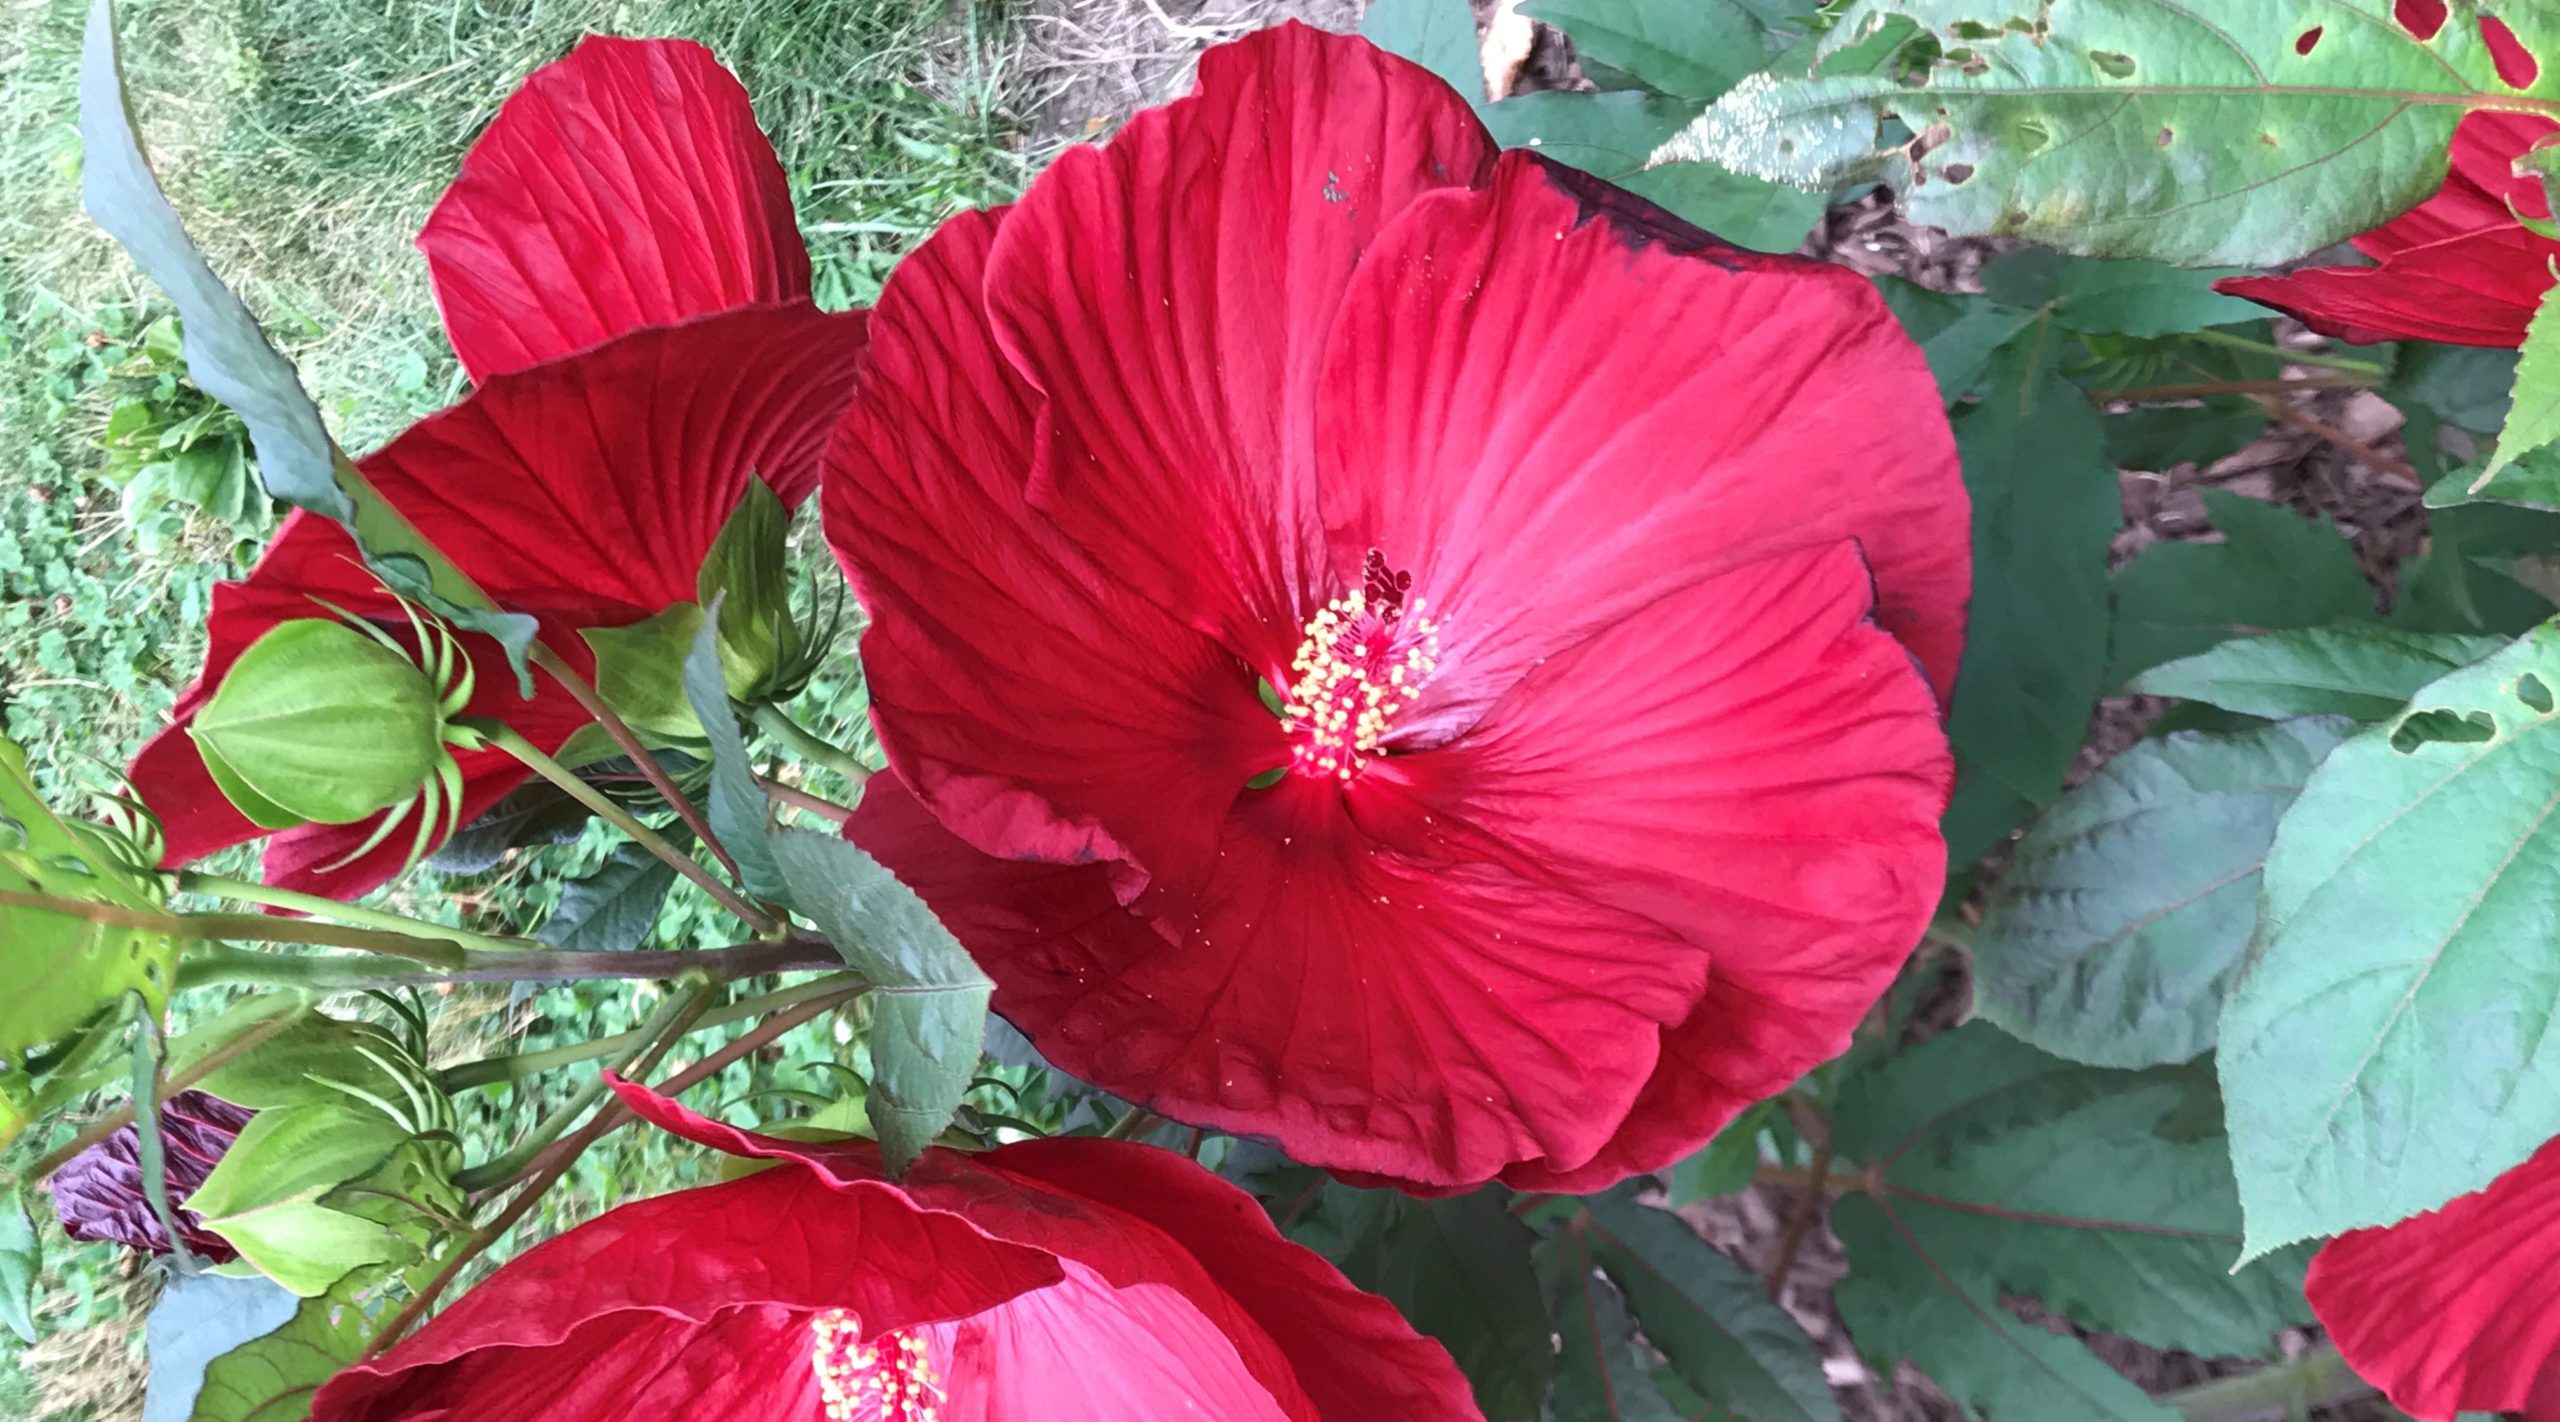 July 2020 Hibiscus at Kruse House Gardencropped